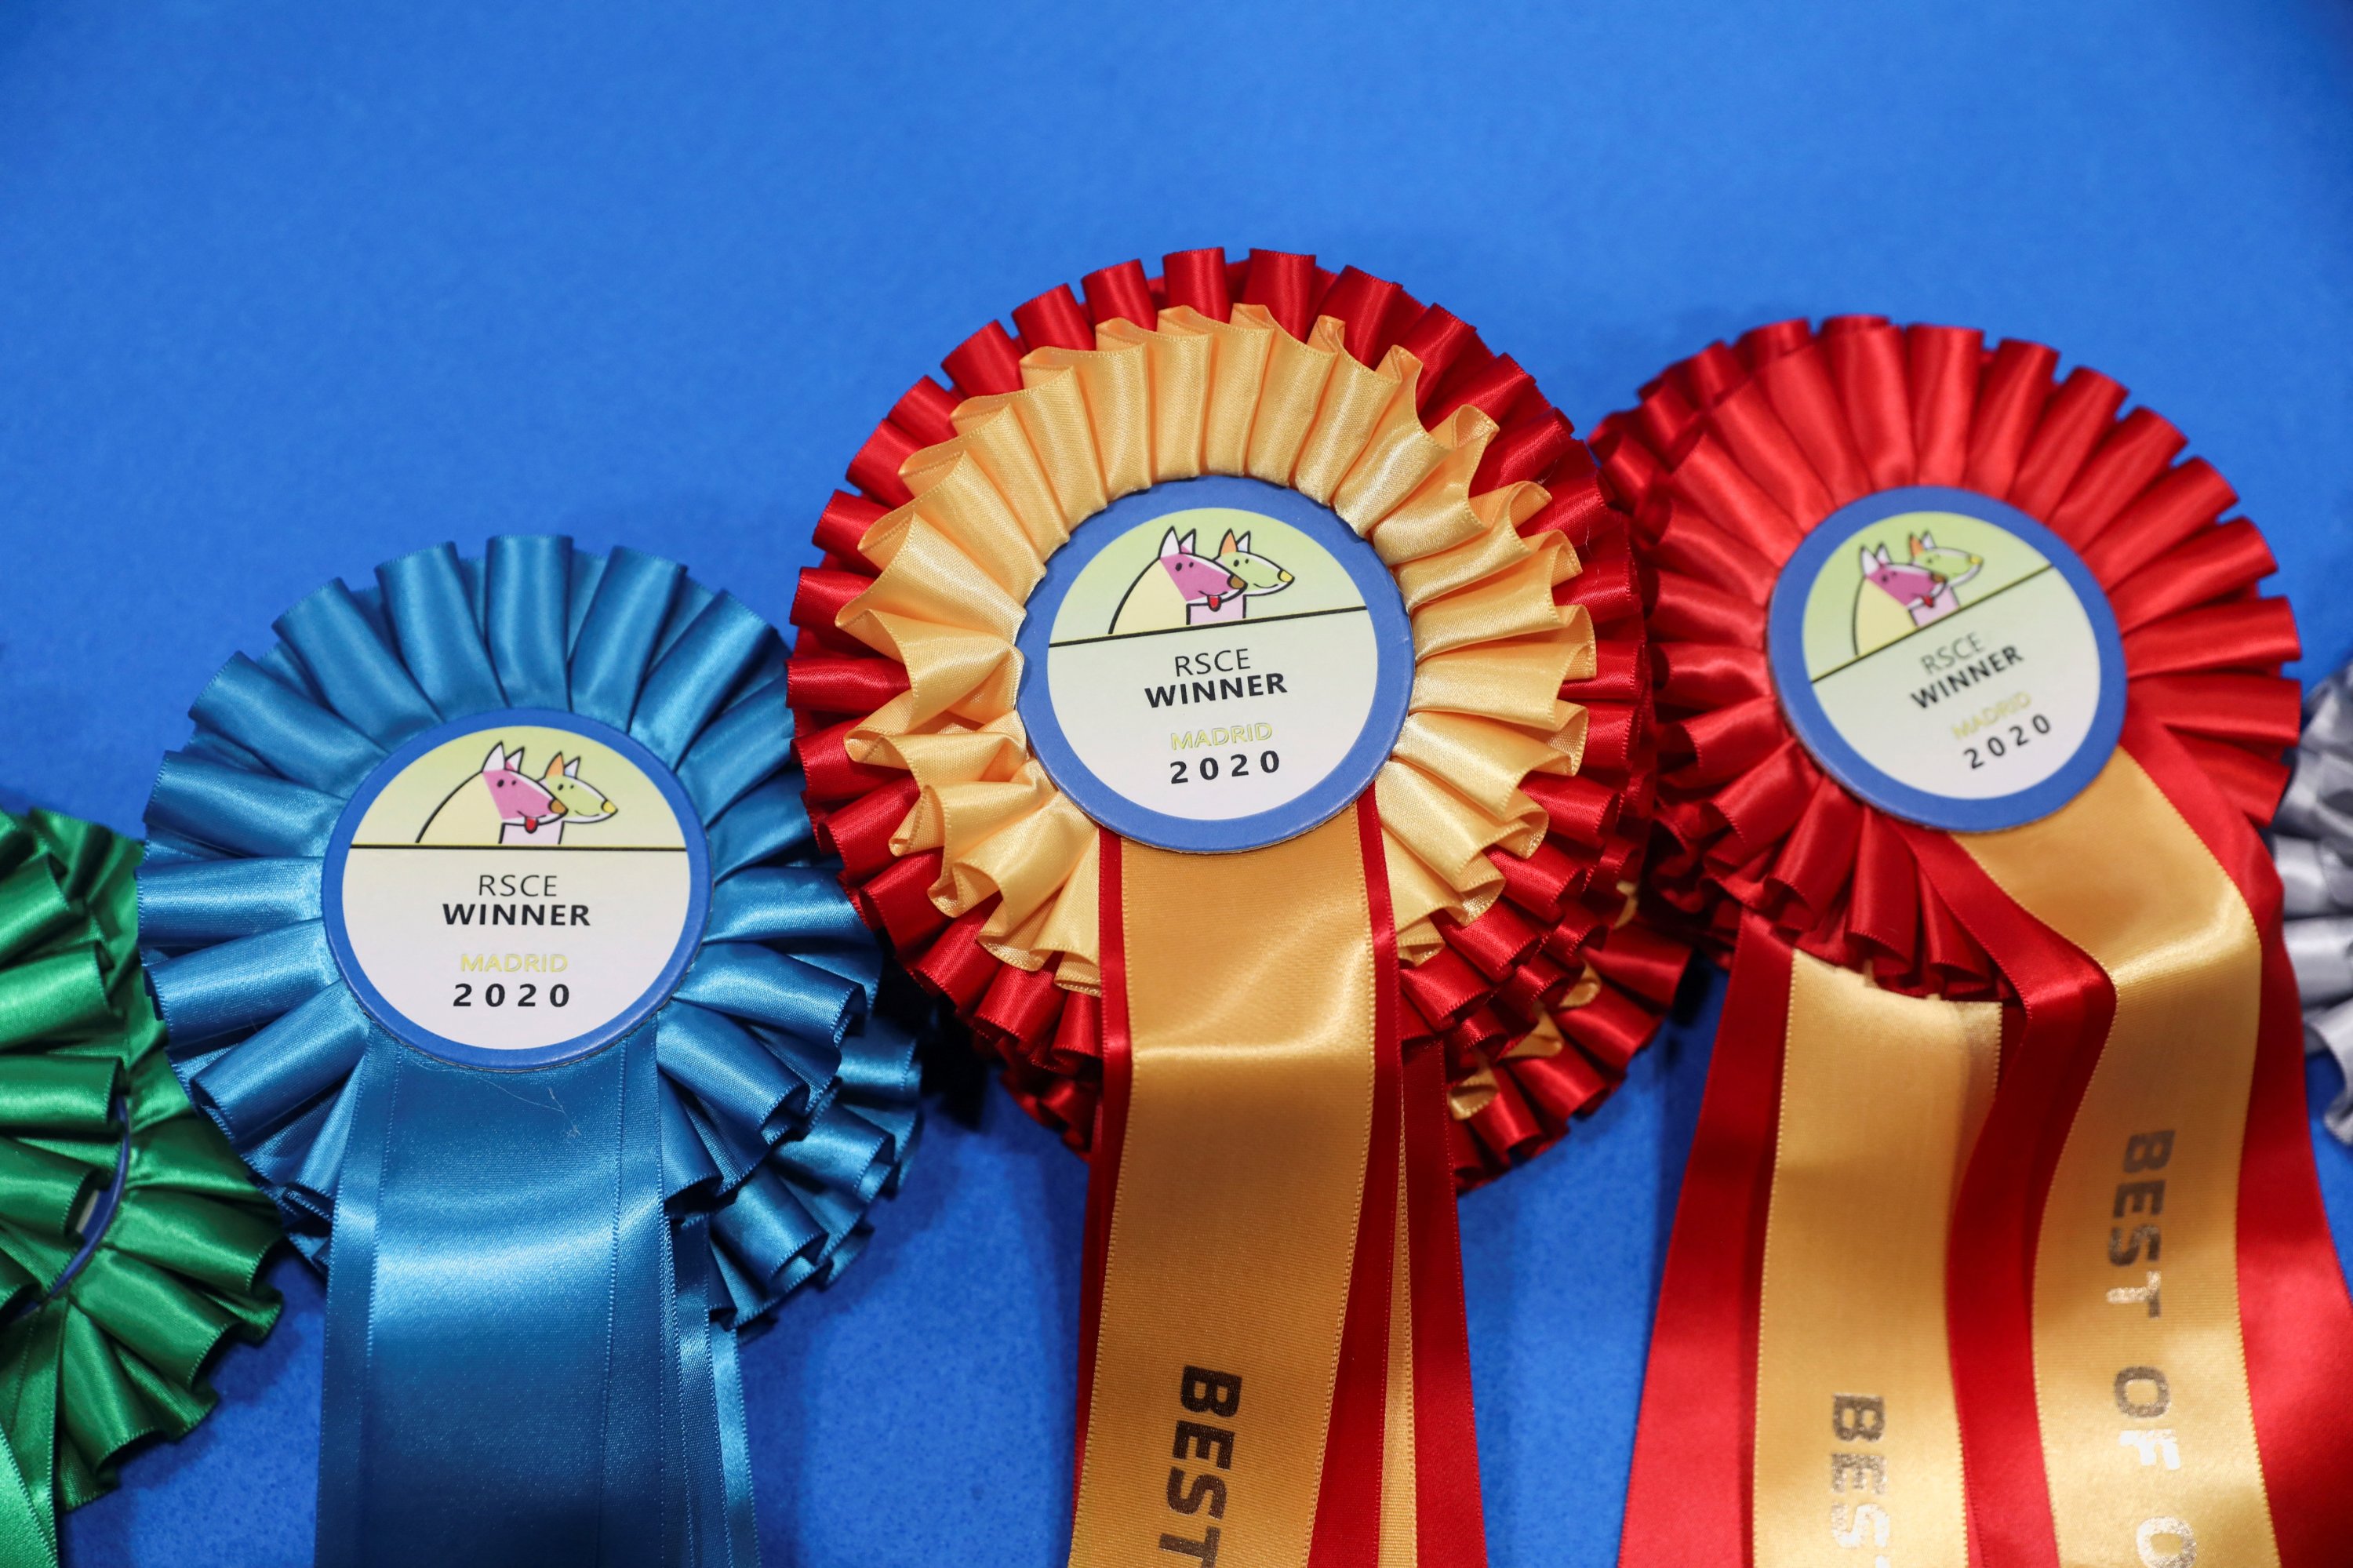 Rosettes are displayed at the 2022 World Dog Show, where more than 15,000 dogs from all around the globe are expected to attend, at the IFEMA conference center in Madrid, Spain, June 23, 2022. (Reuters Photo)